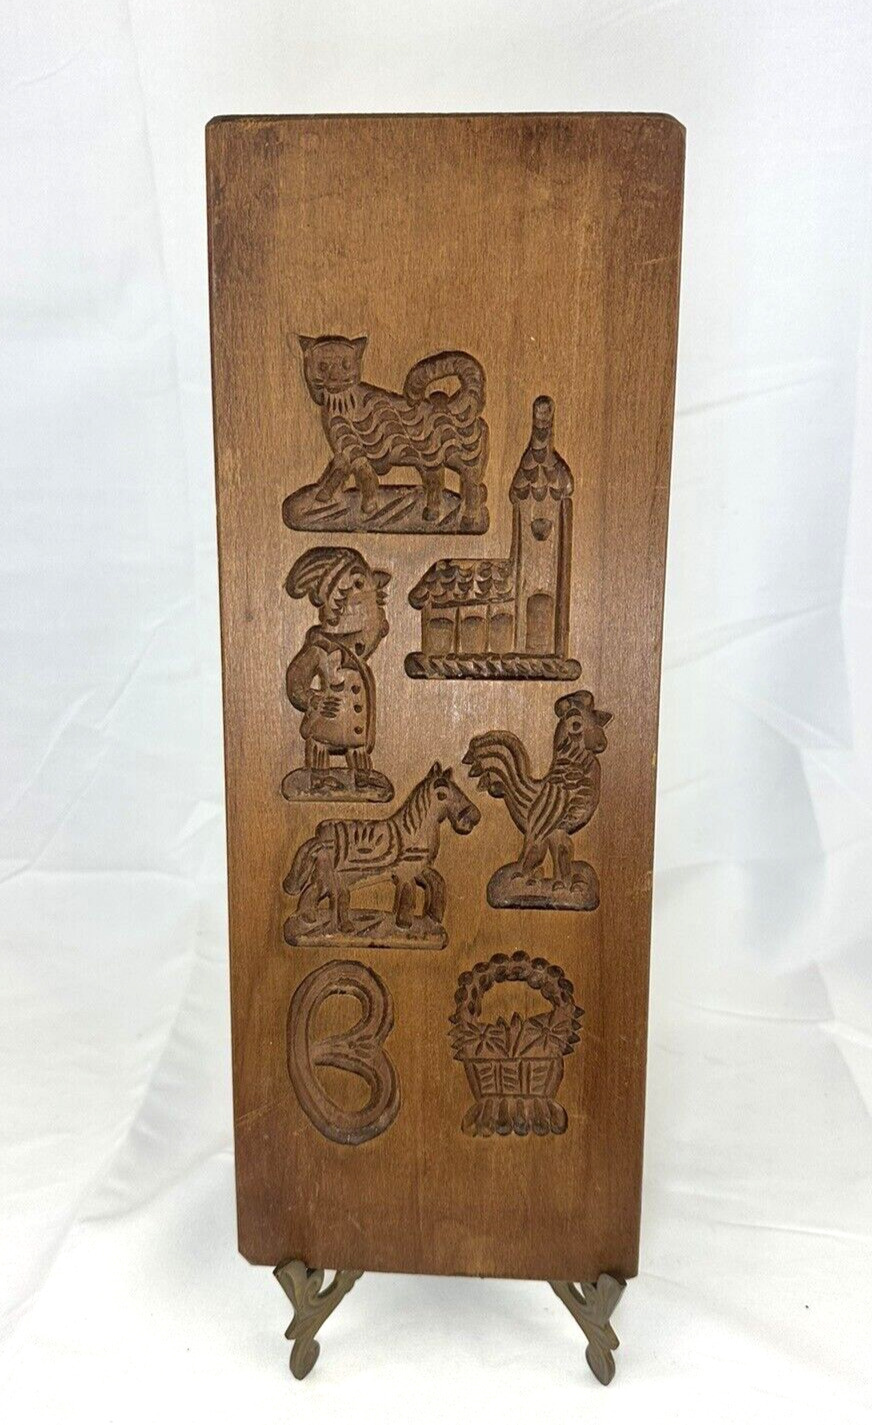 Antique Rare 19 Century Wooden Model Springerle Biscuits Cookie Mold B18